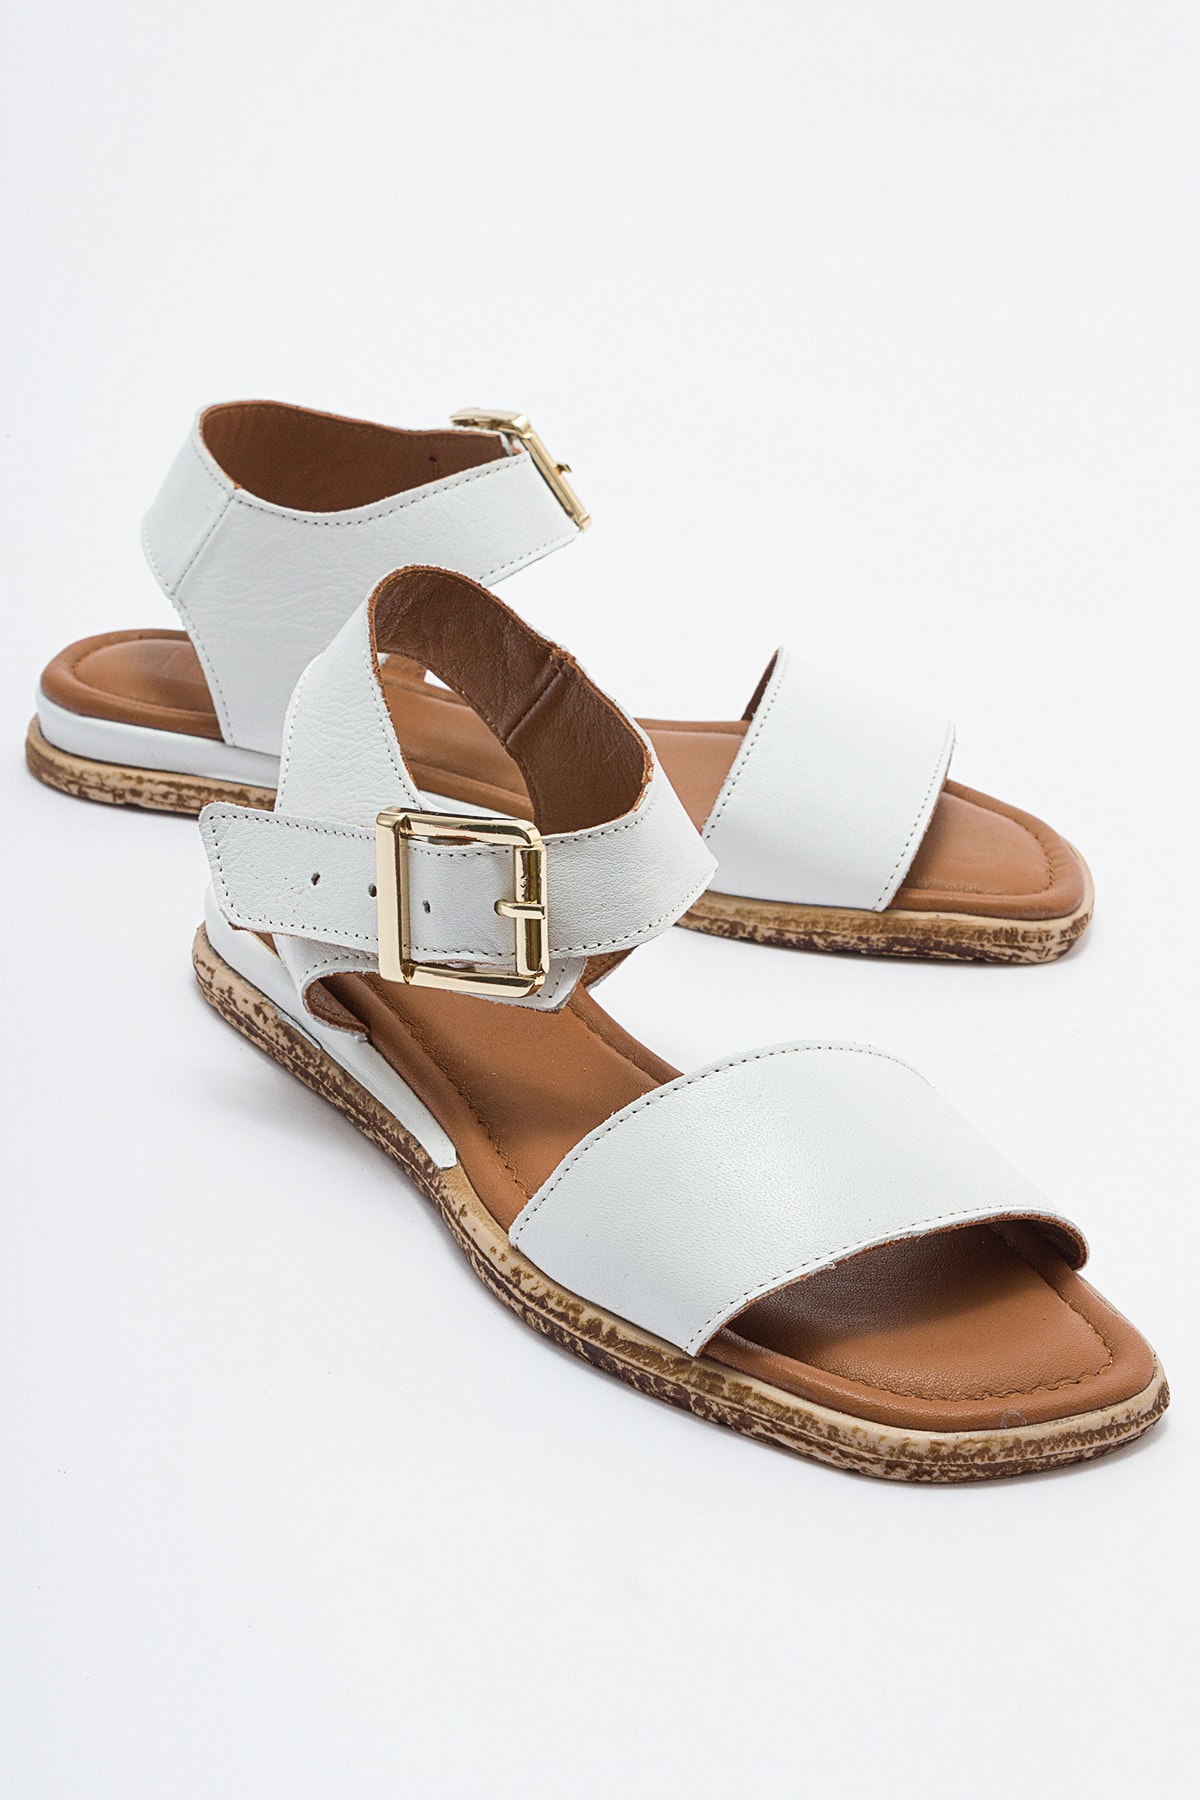 LuviShoes 713 White Women's Genuine Leather Sandals